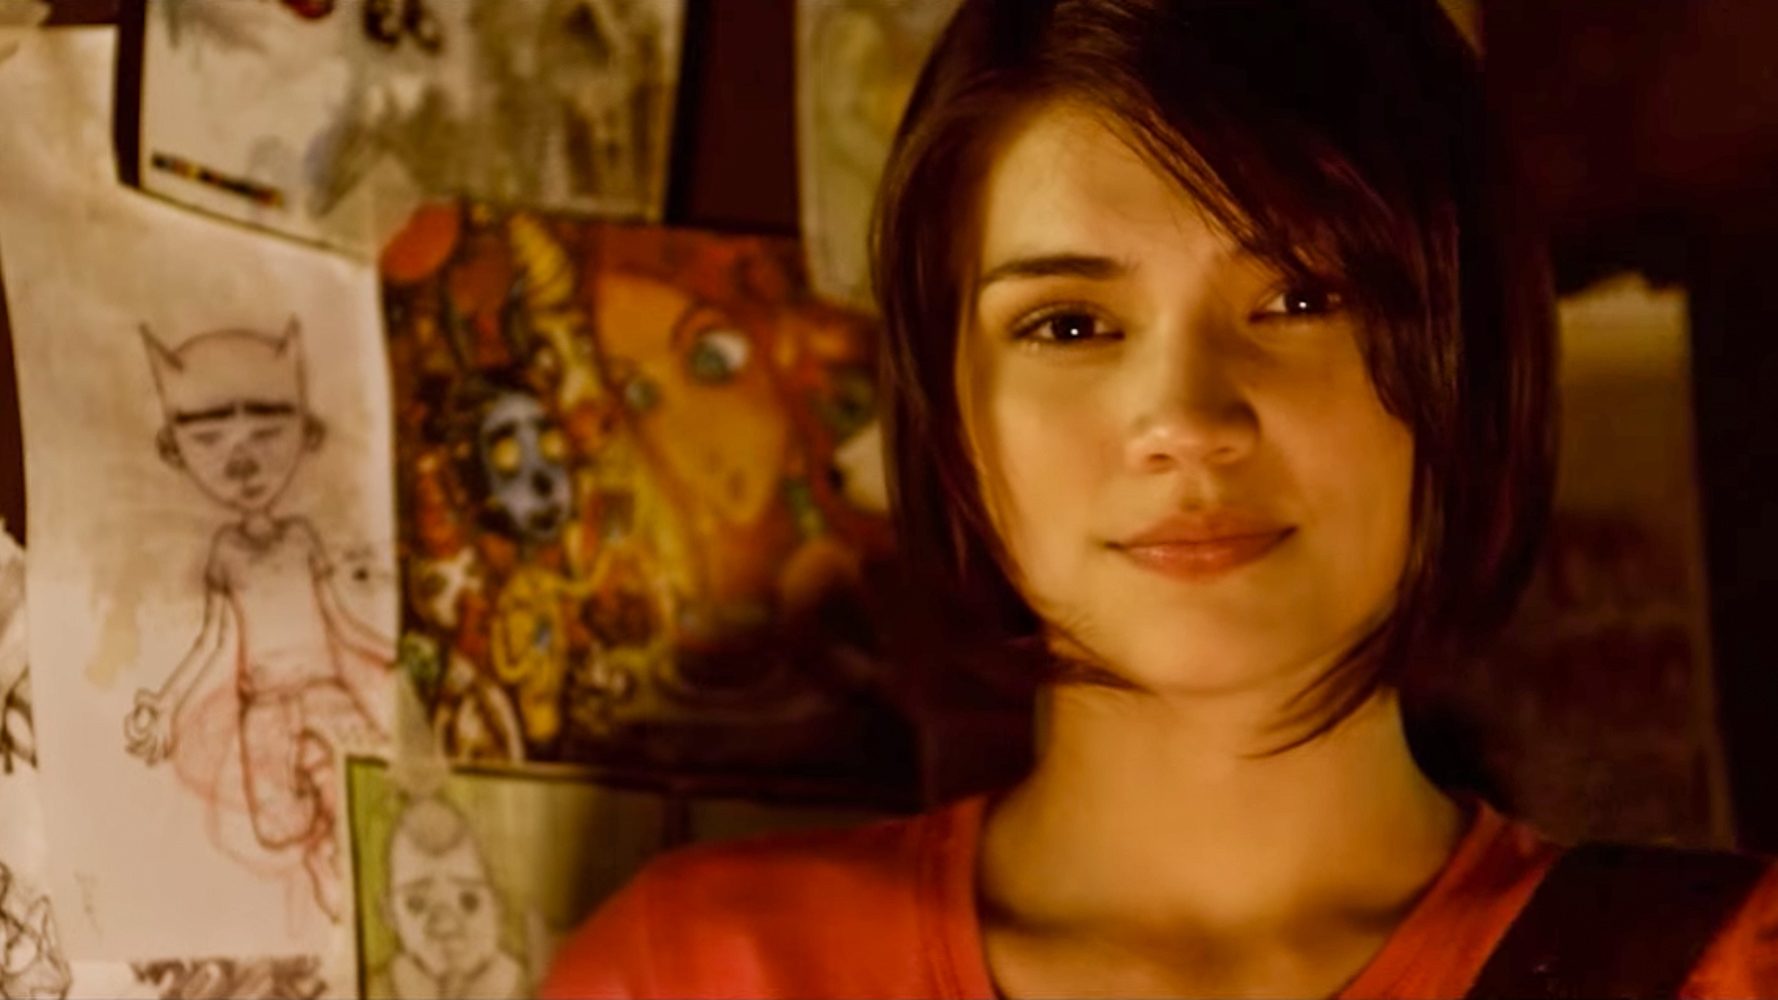 SALLY. Rhian Ramos is luminous on-screen as the mysterious, yet lovely Sally.  